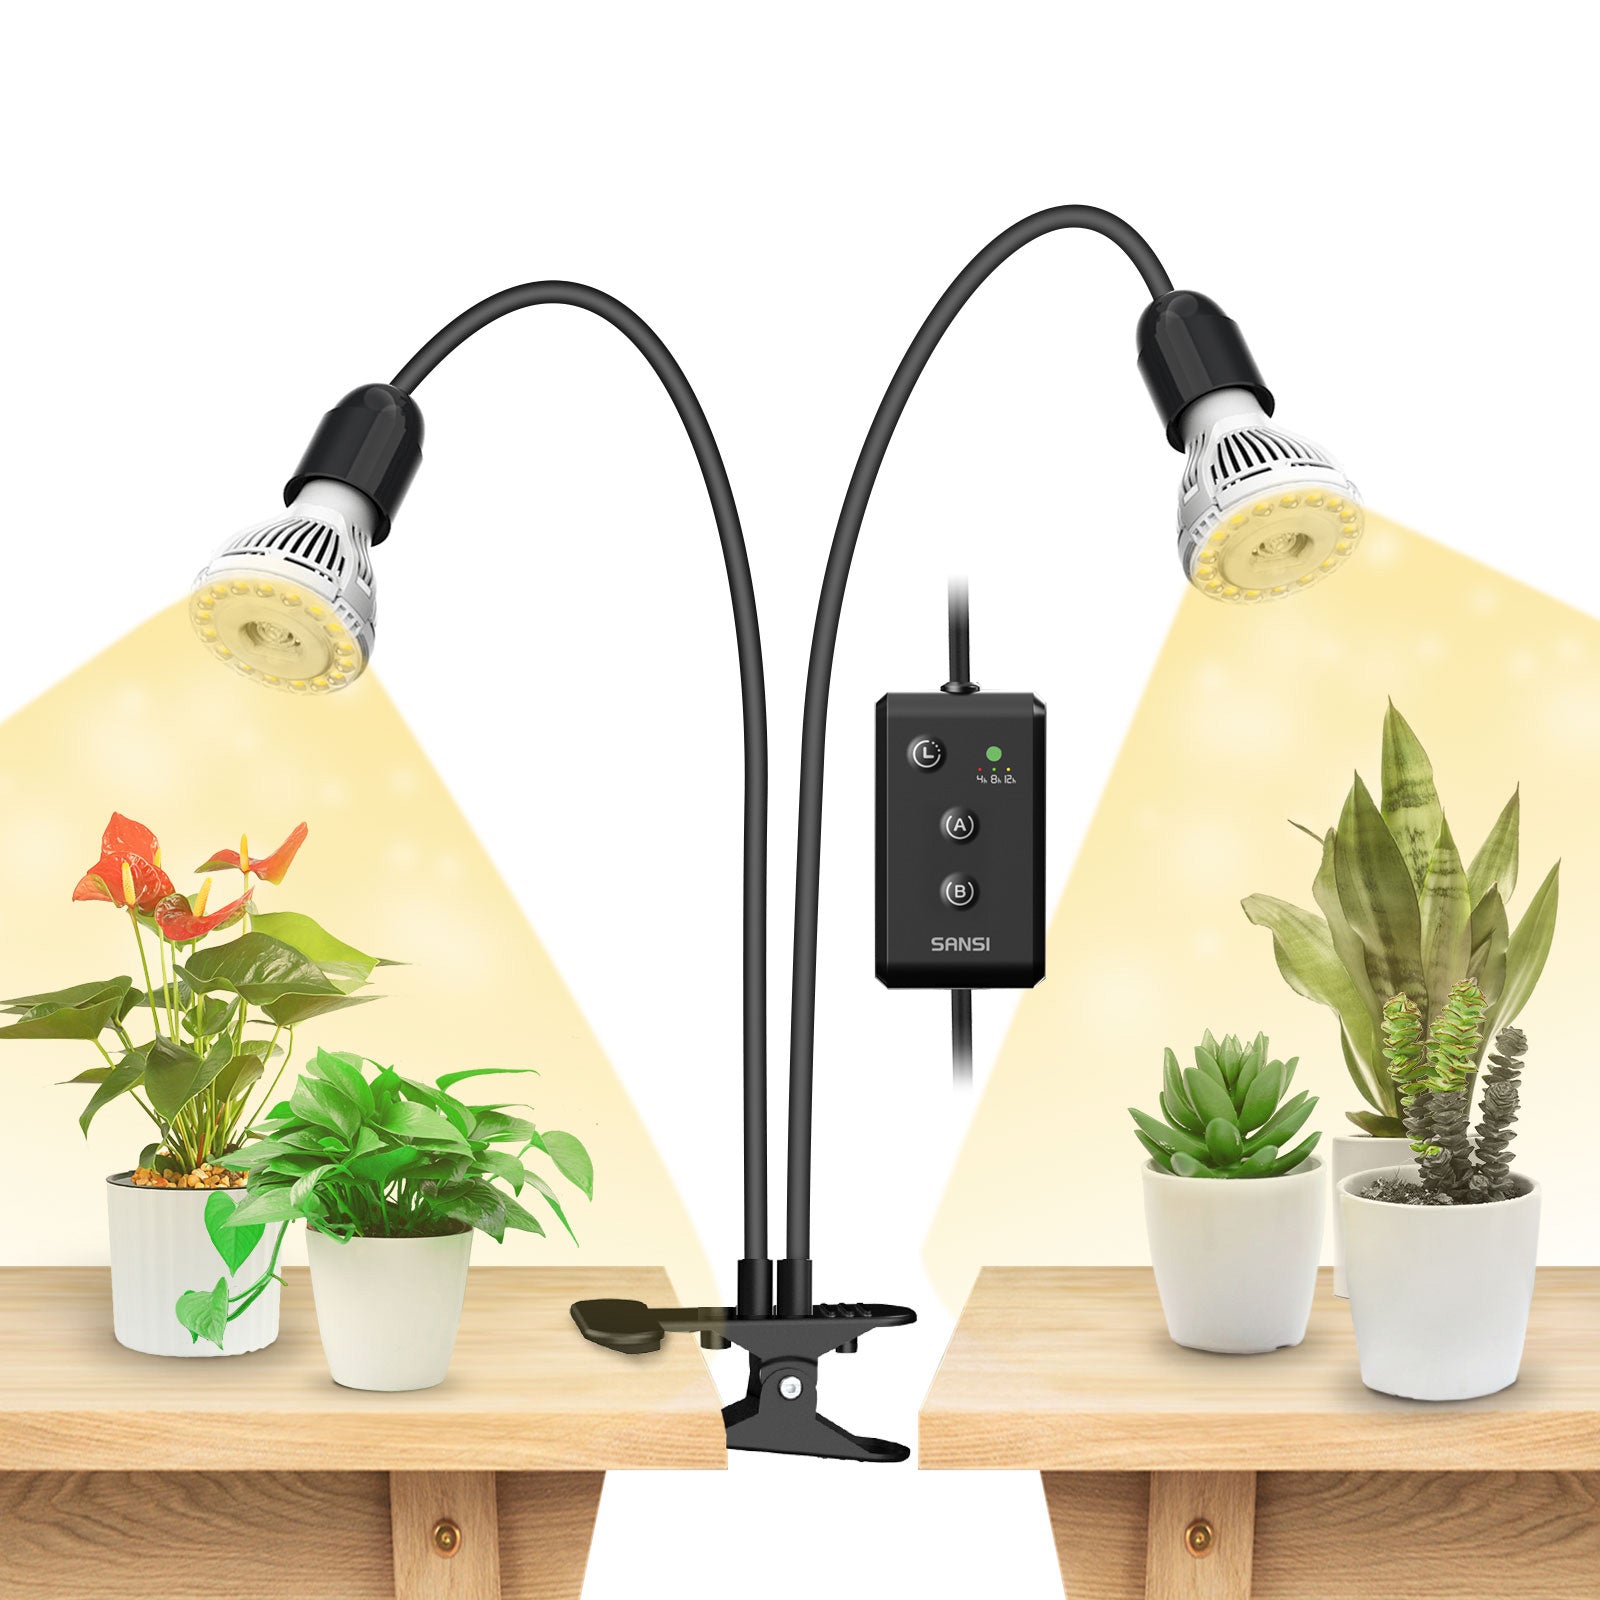 20W Adjustable 2-Head Clip-on LED Grow Light with Timer(US ONLY)